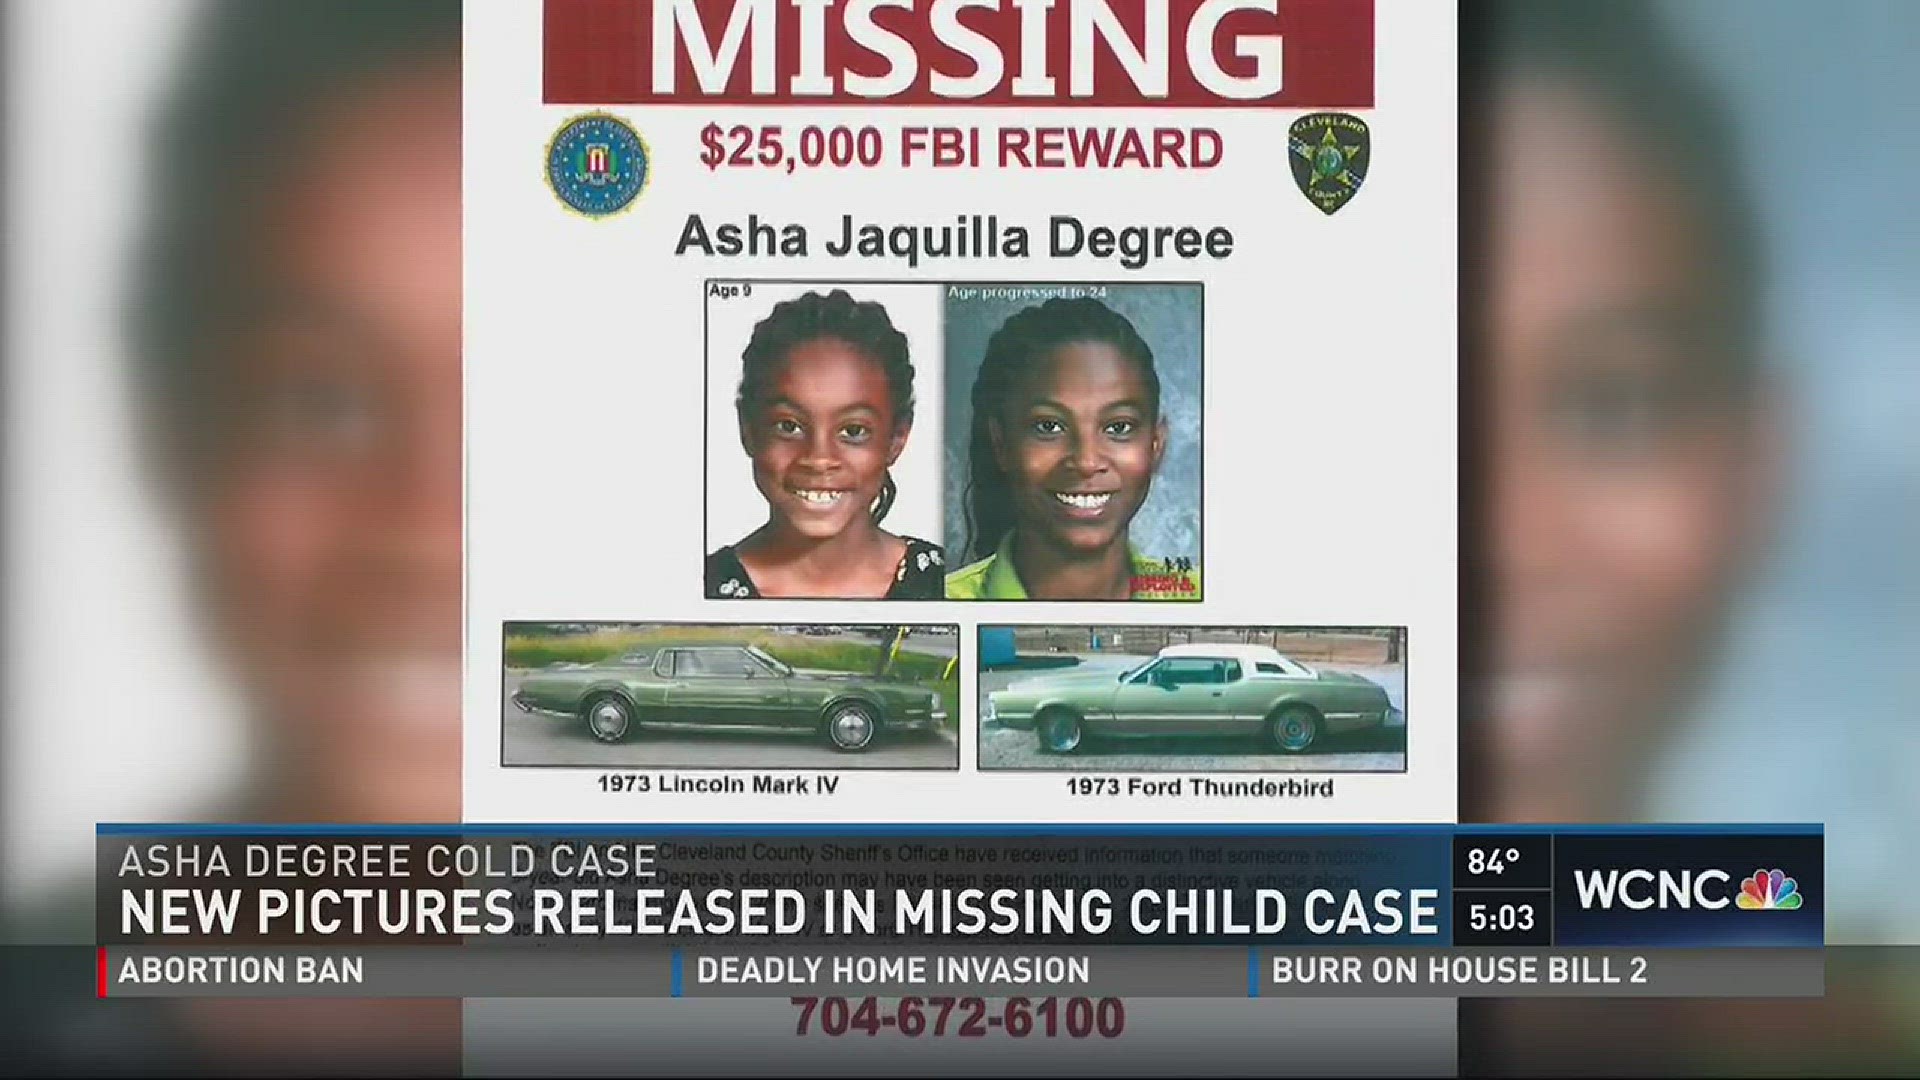 FBI agents released new photos in the case of Asha Degree, who went missing from Shelby 16 years ago.